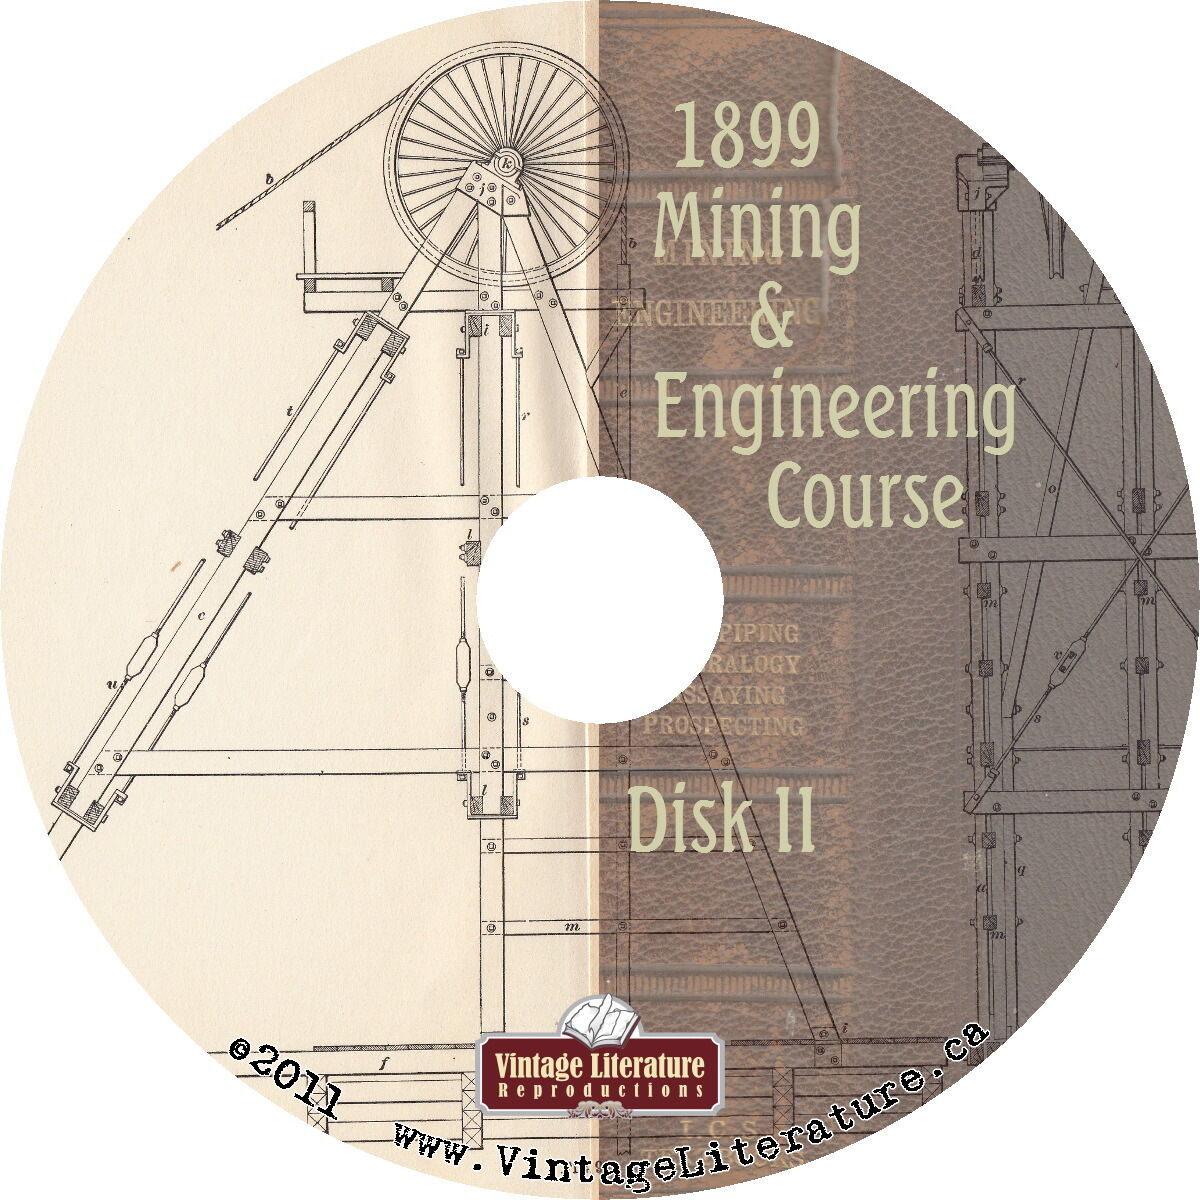 Mining & Engineering { 6 Volume ~ How To Mine Gold Course from 1899 } on DVD